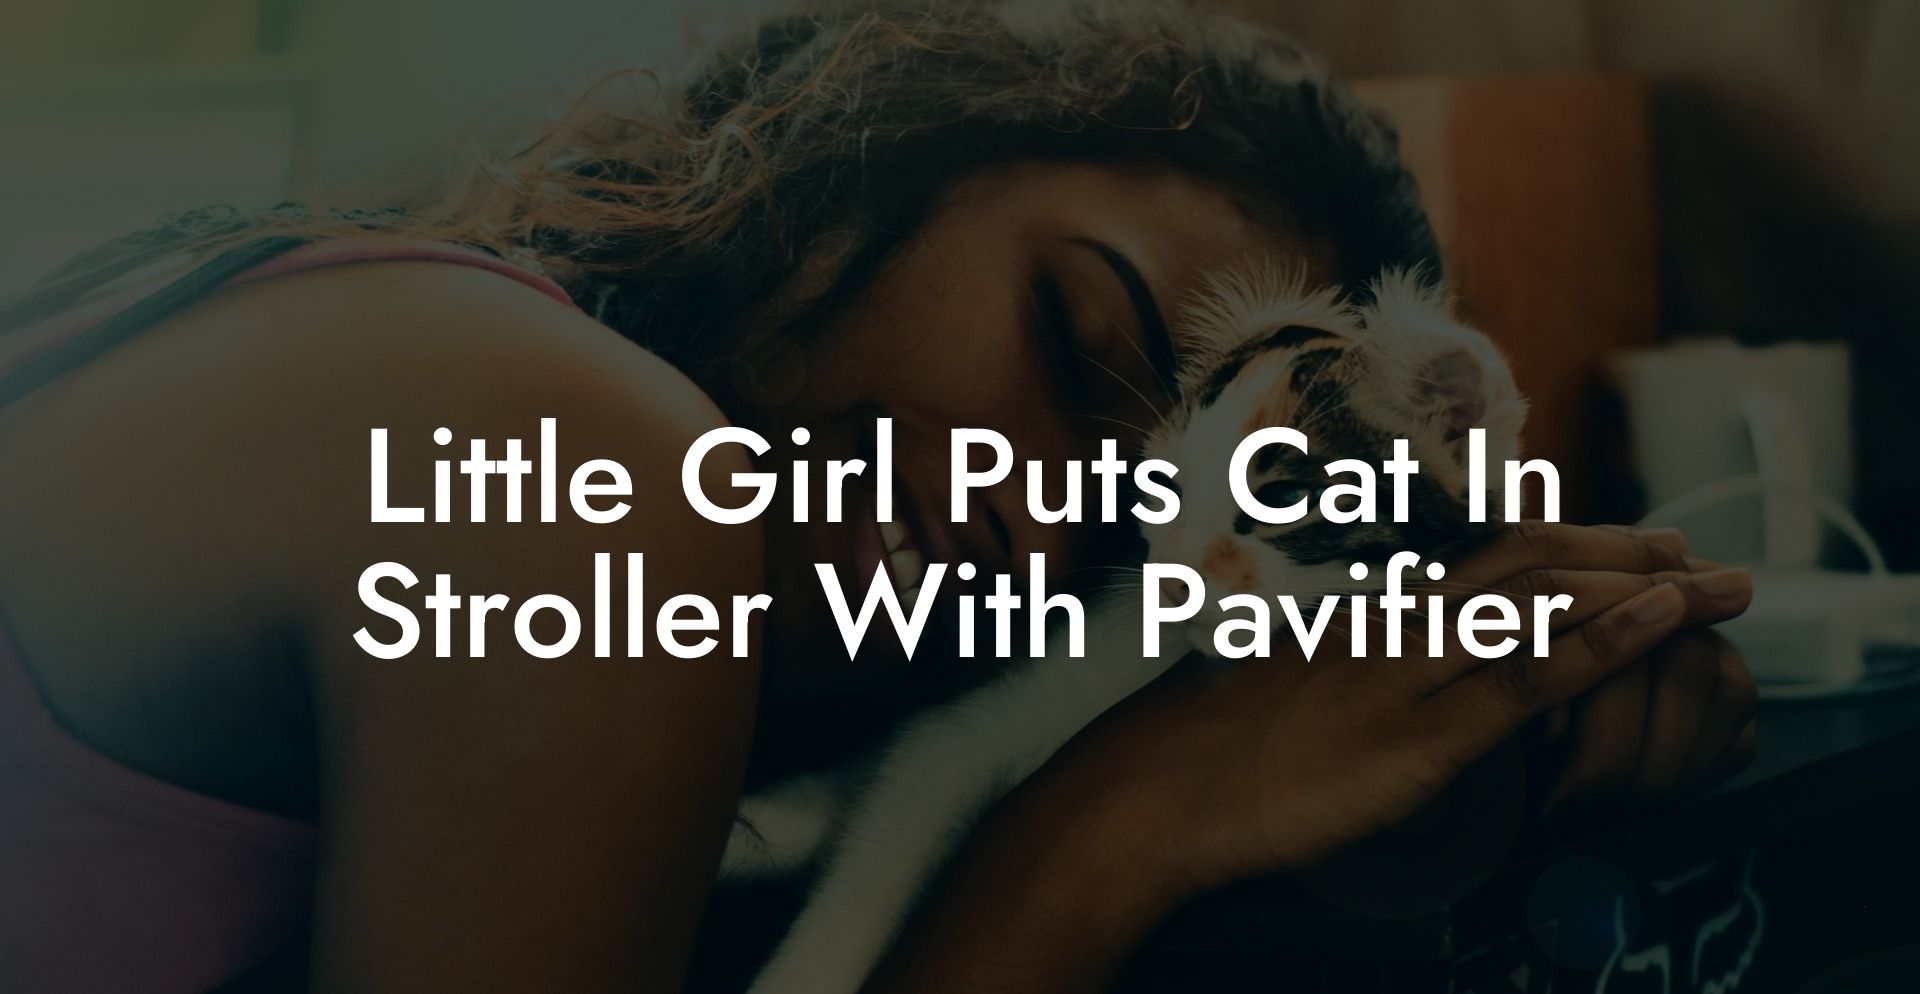 Little Girl Puts Cat In Stroller With Pavifier